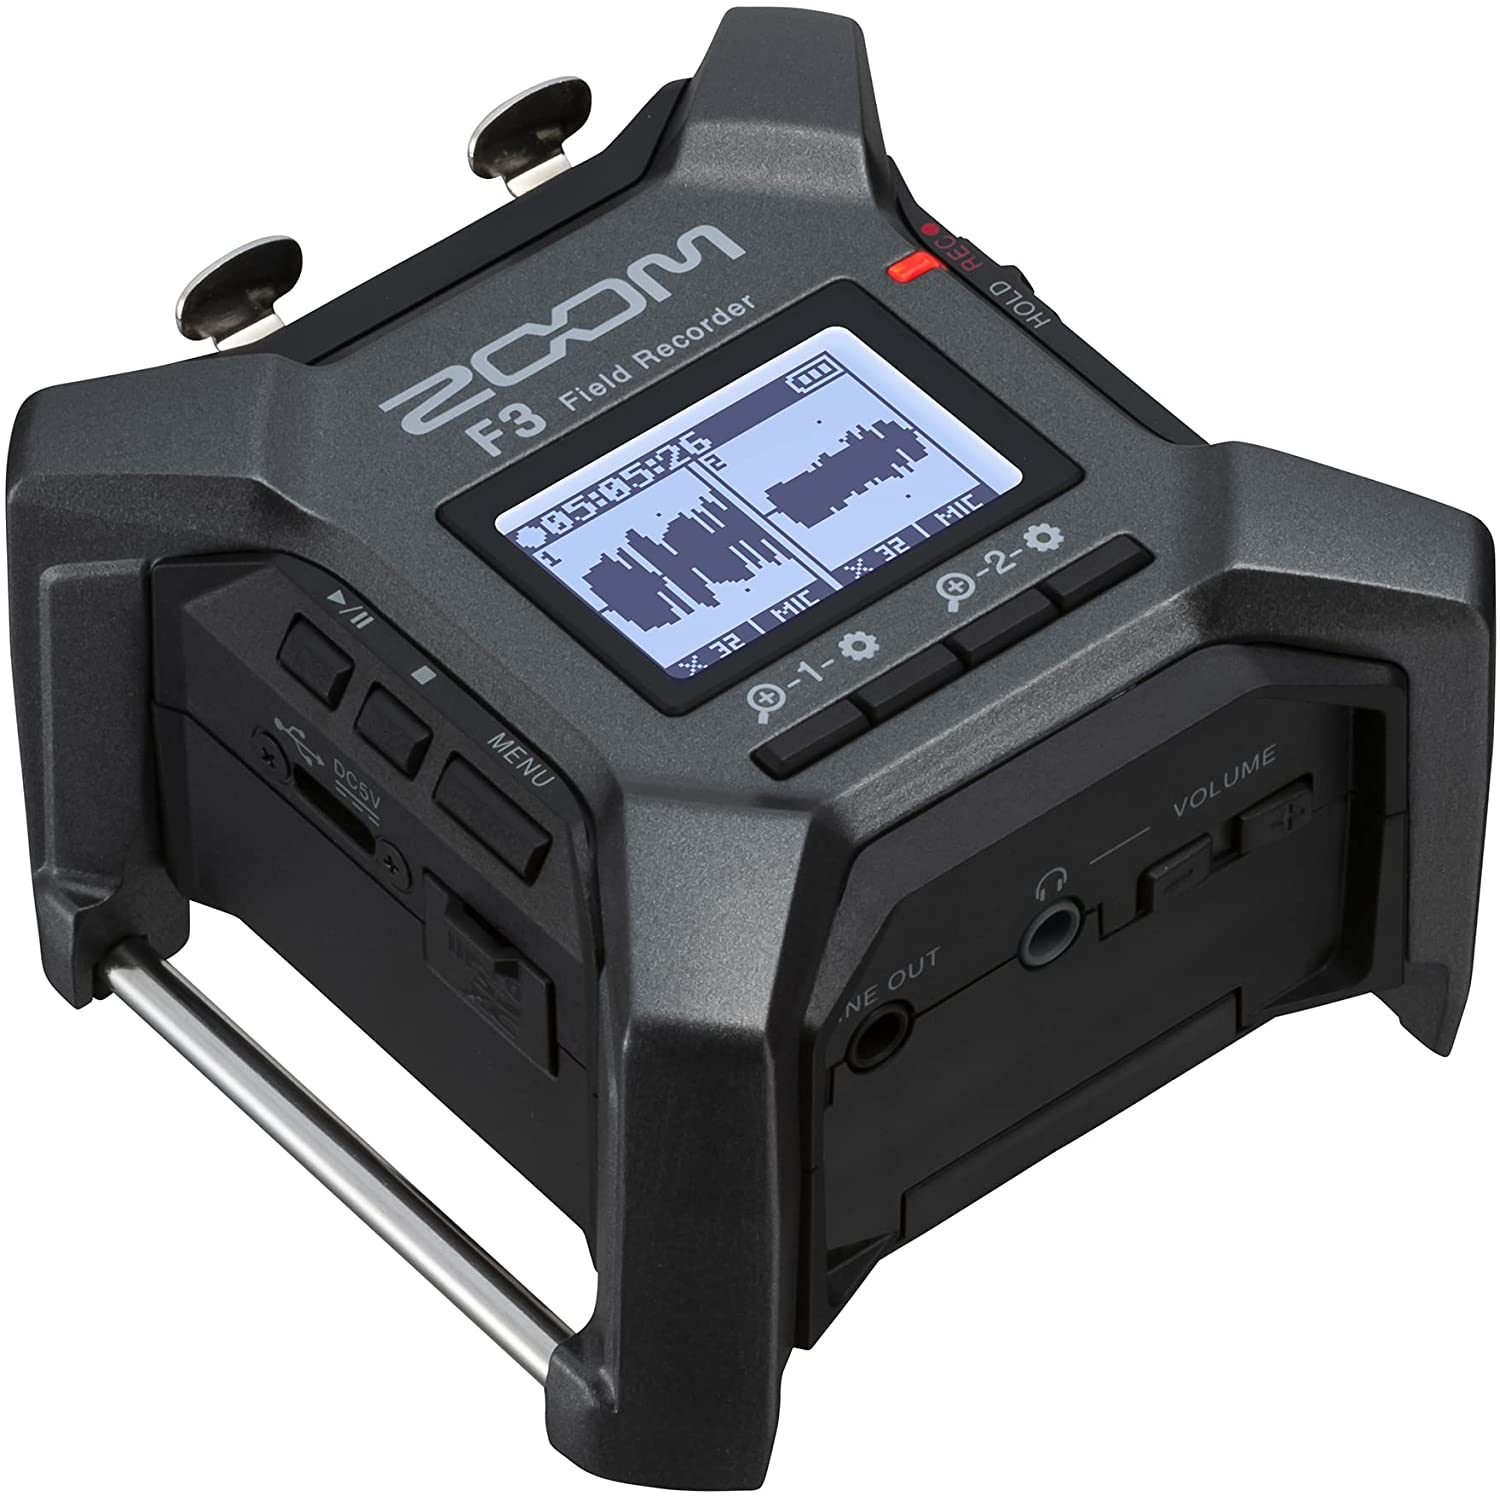 First look: Zoom F3 2-track 32-bit float recorder with 48 kHz sampling rate 23